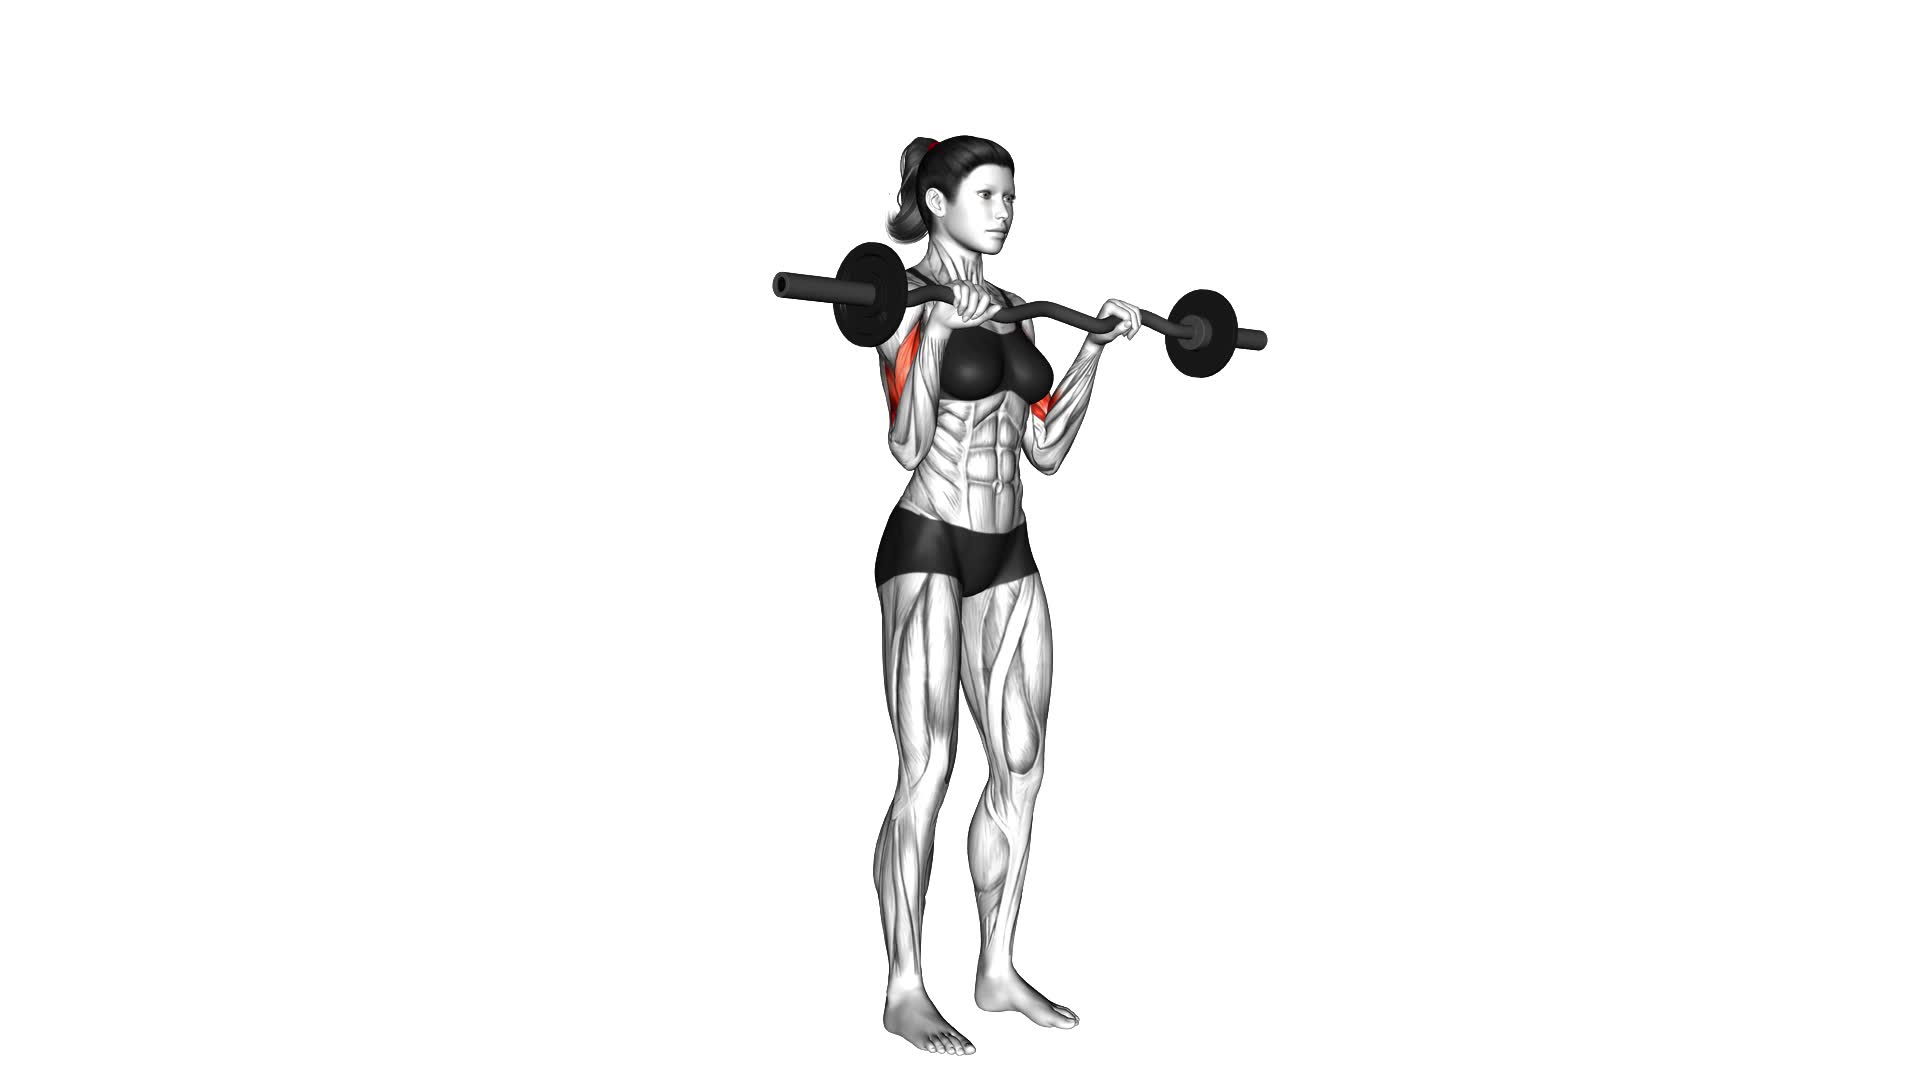 EZ-Barbell Reverse Grip Curl (female) - Video Exercise Guide & Tips